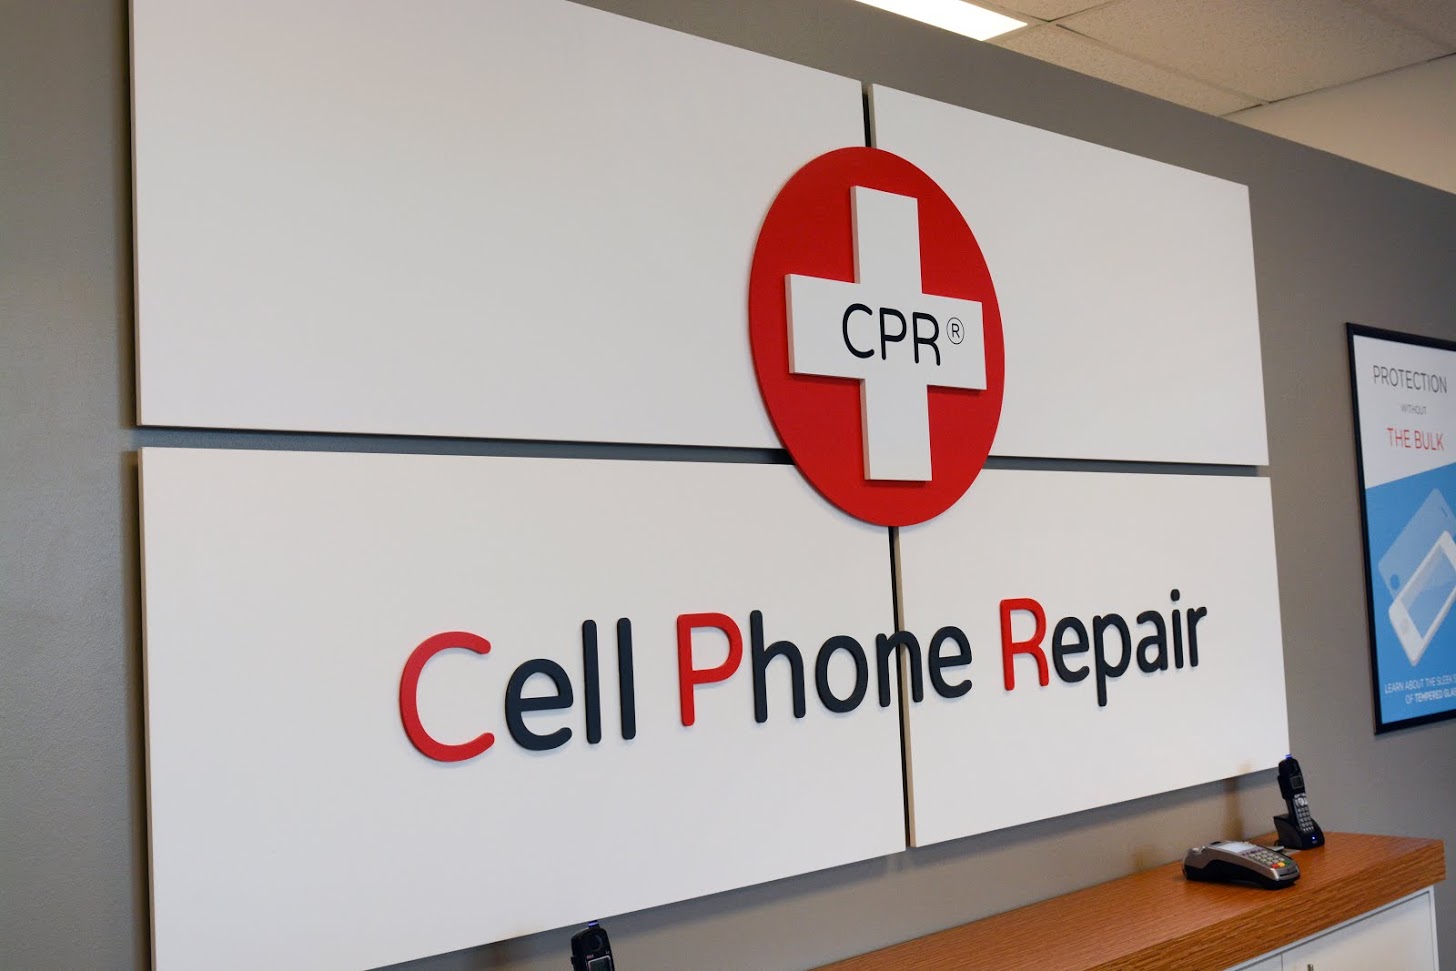 CPR Cell Phone Repair, Monday, May 27, 2019, Press release picture